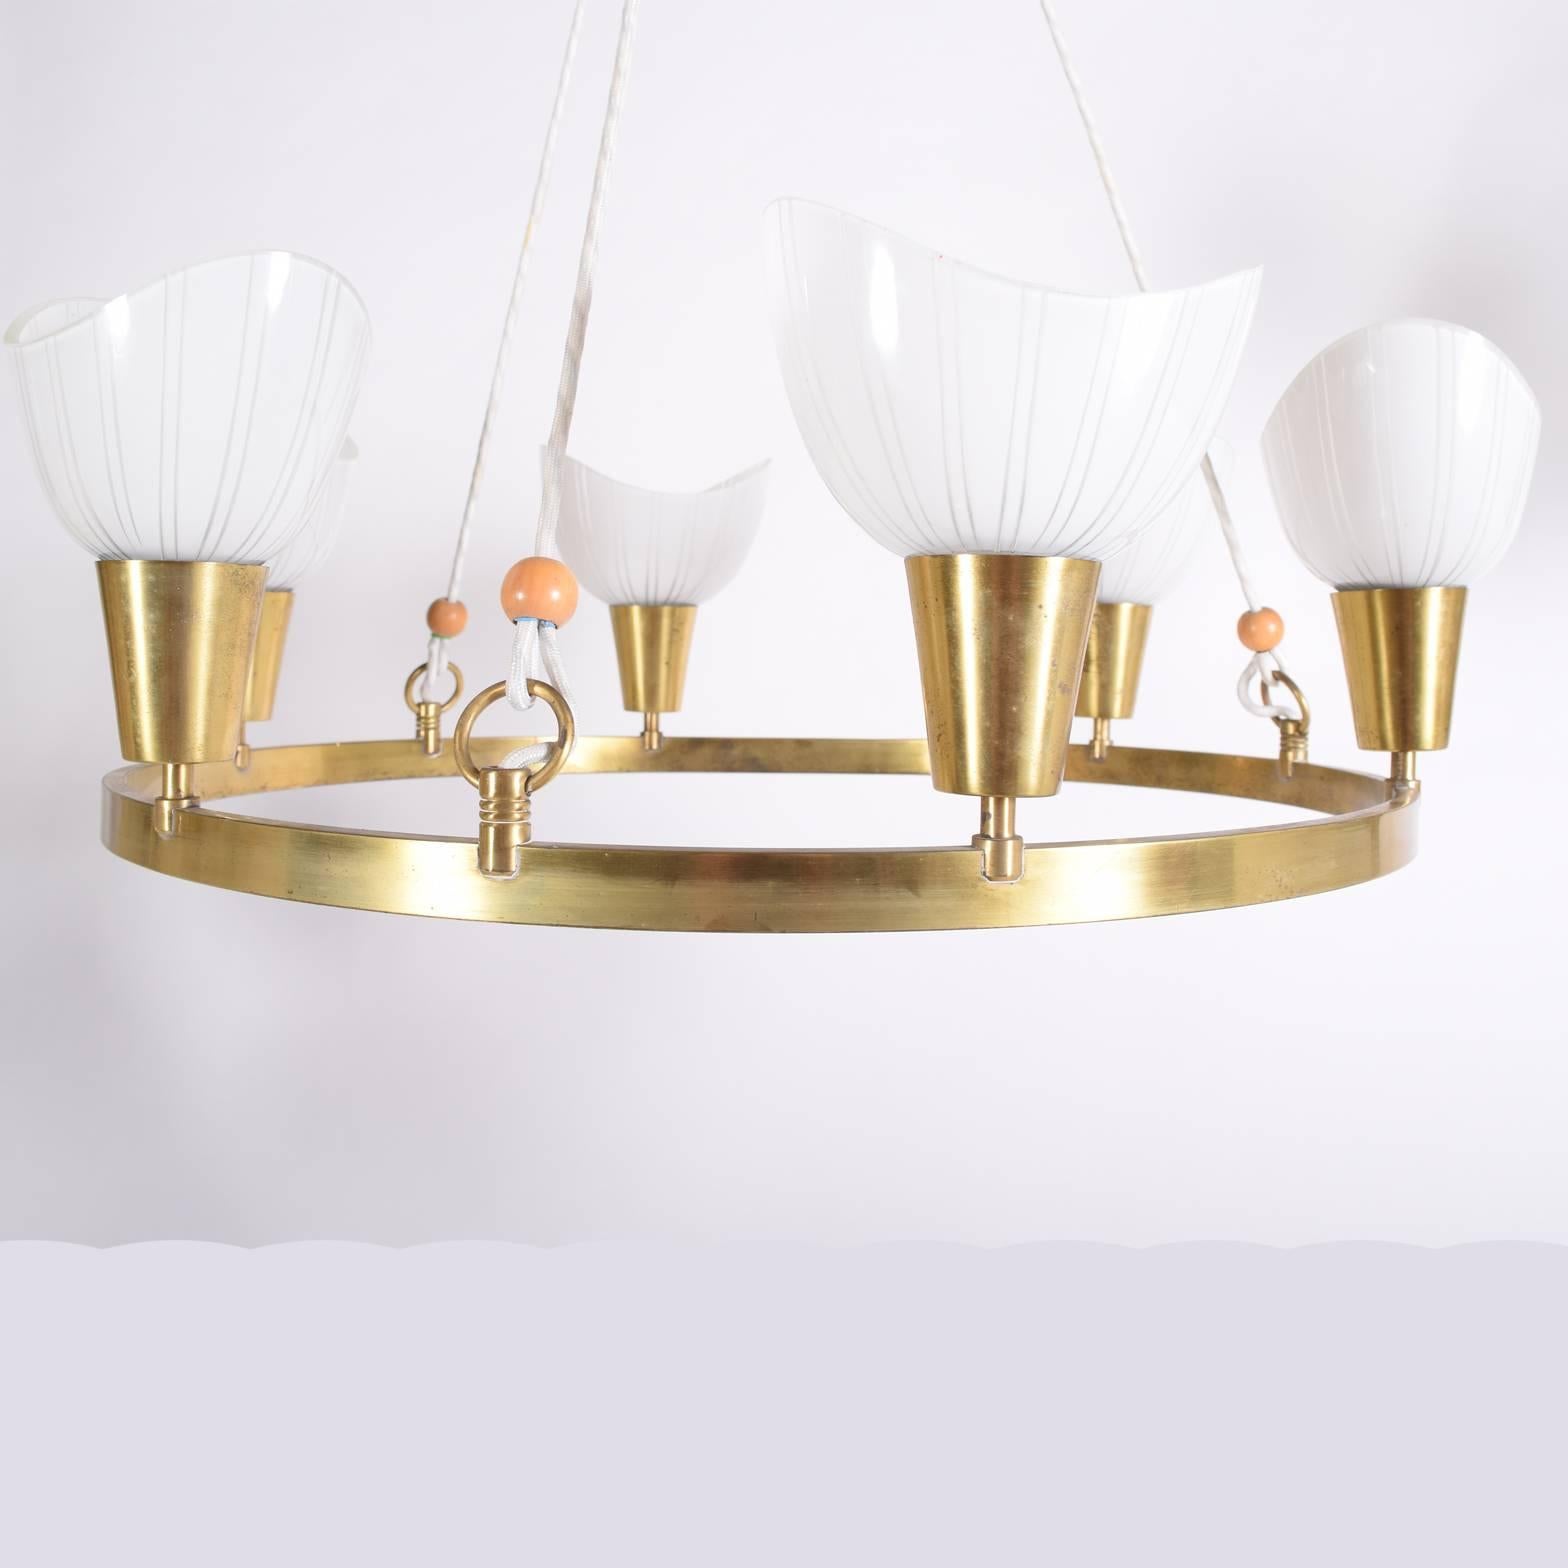 Six upright glass shades; suspended solid brass ring; signed Lyfa on the sockets.